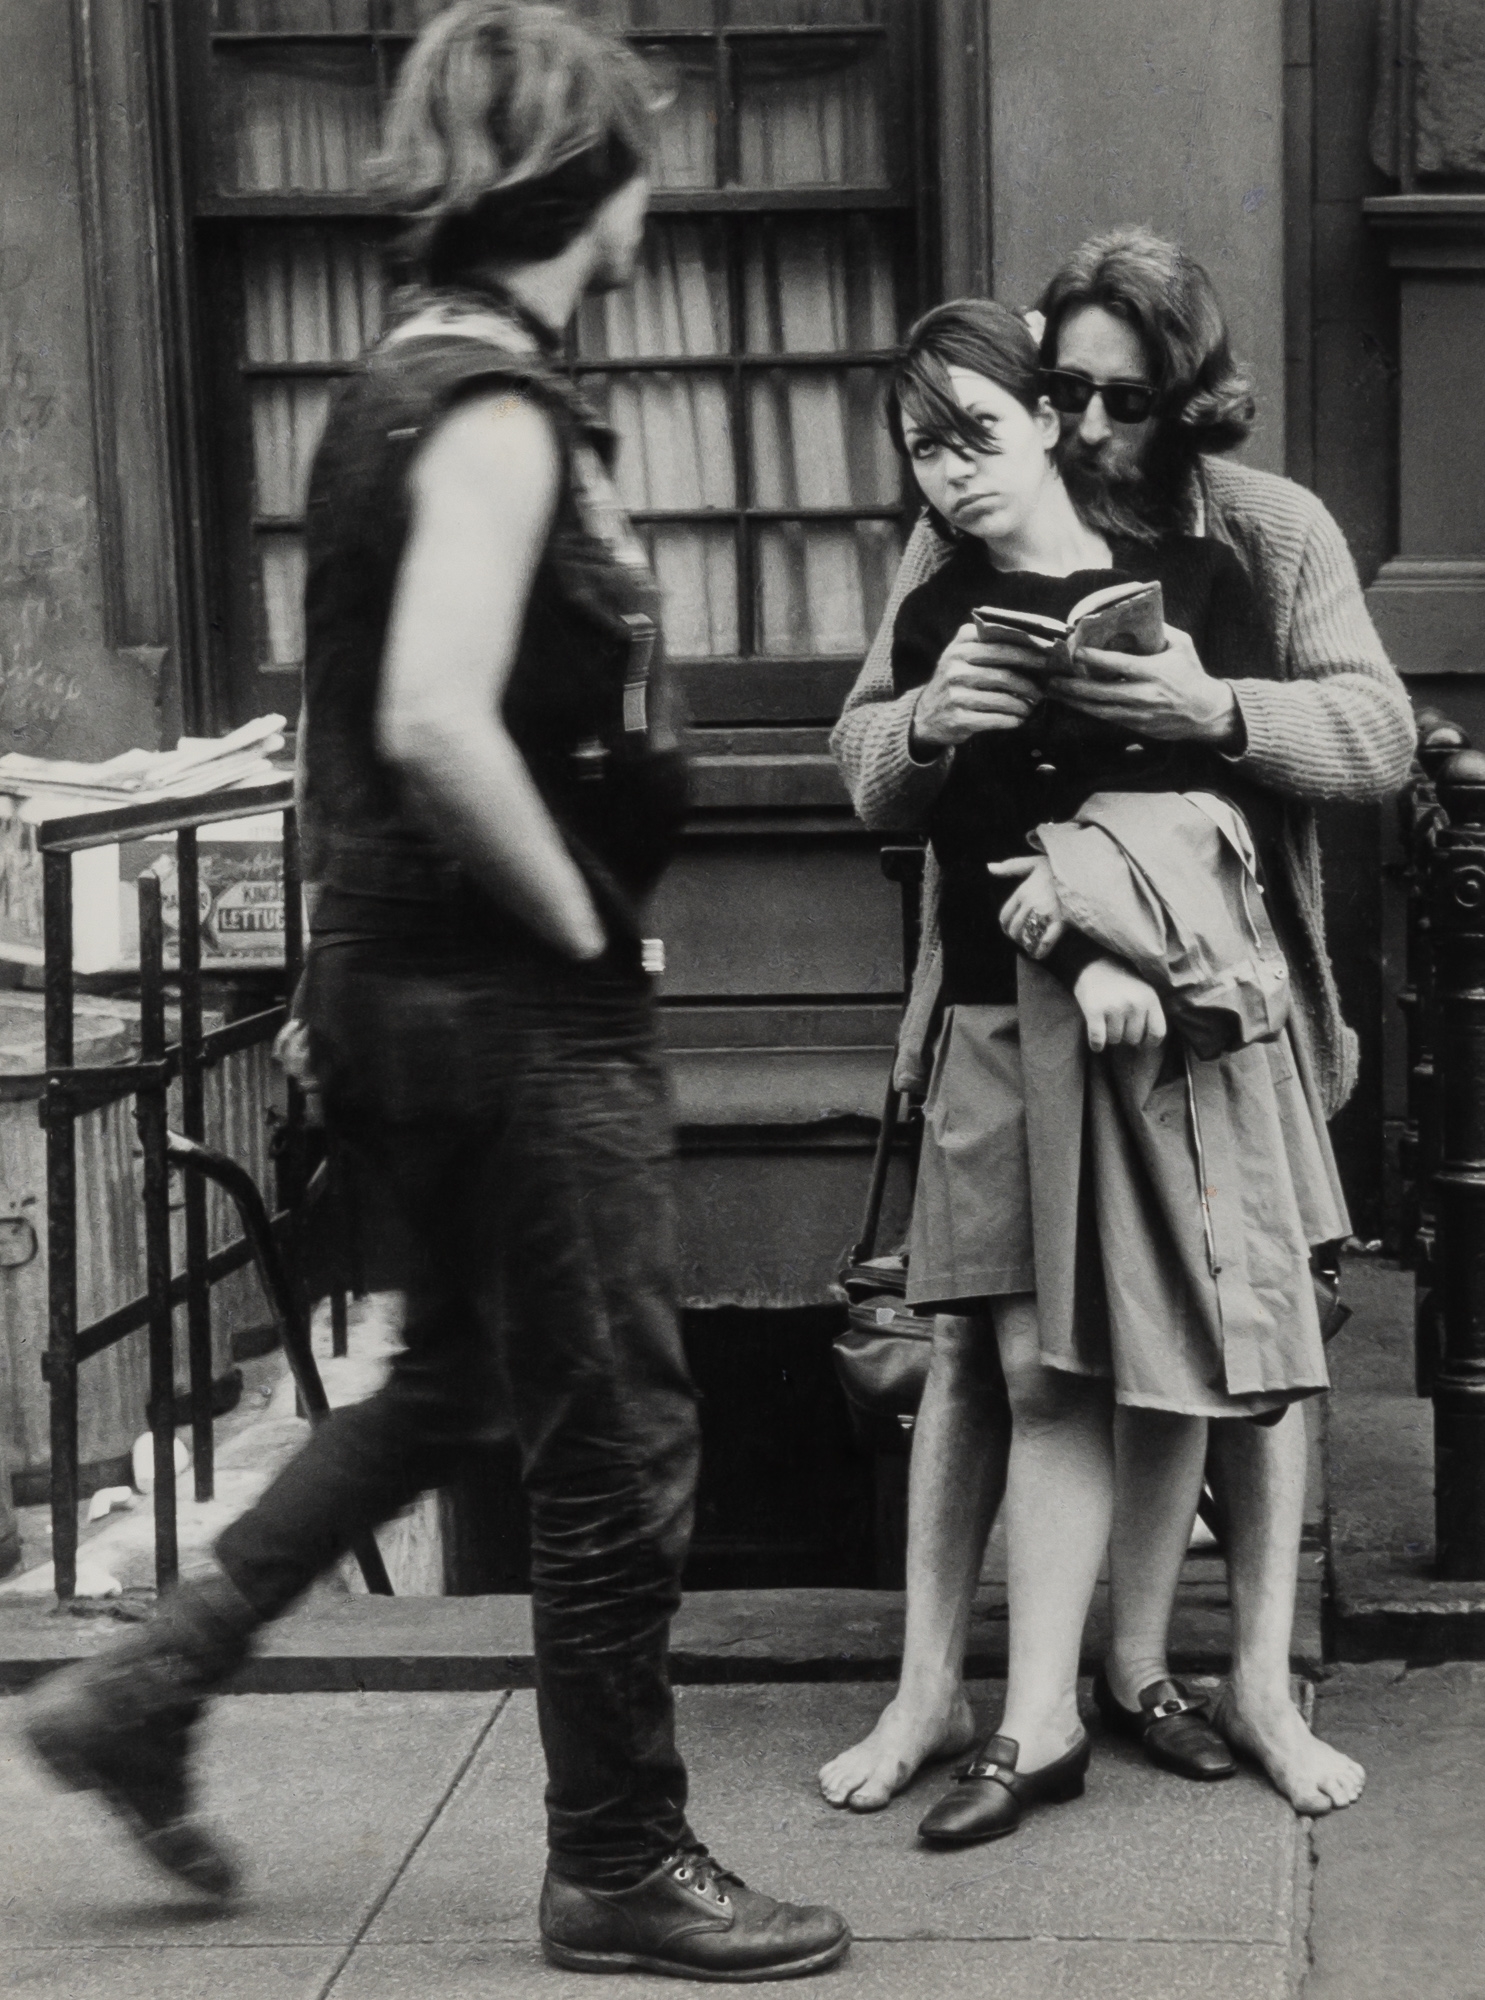 Artwork by Leon Levinstein, LEVINSTEIN, LEON (1913-1988) Untitled [couple on street, man reading to woman, barefoot],, Made of Vintage gelatin silver print